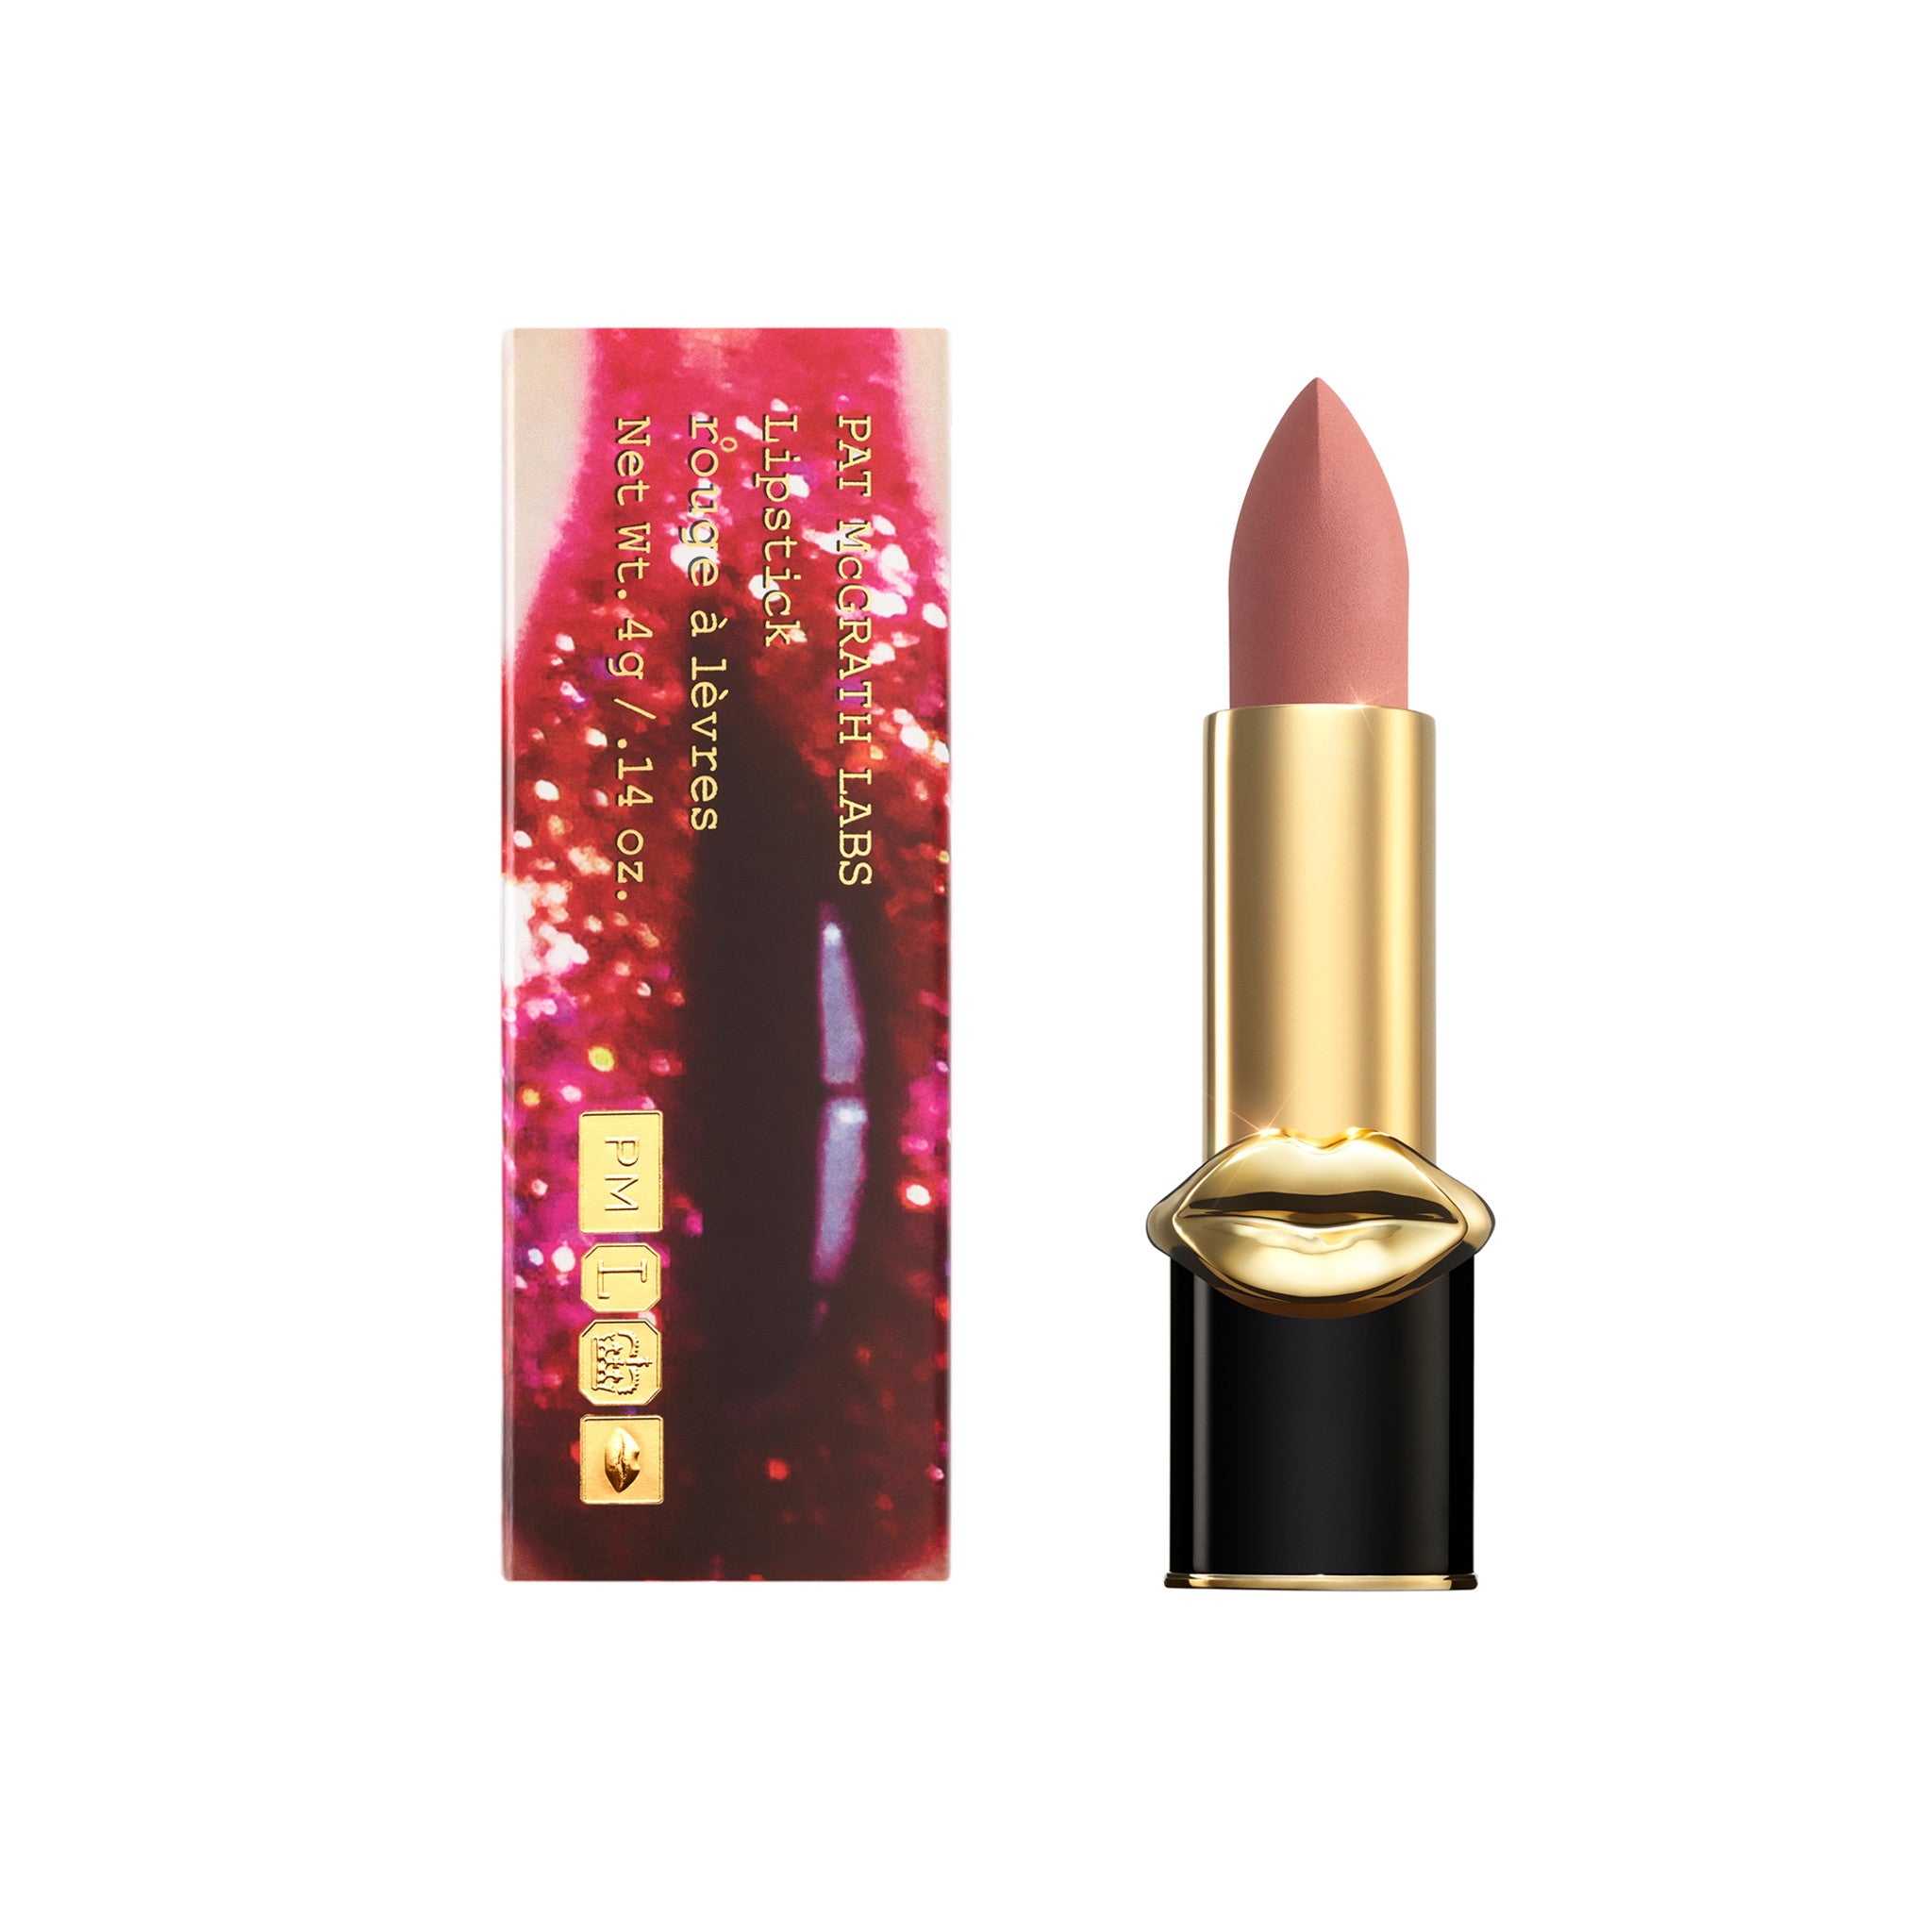 Pat McGrath Labs MatteTrance Lipstick Color/Shade variant: Divine Rose main image. This product is in the color nude